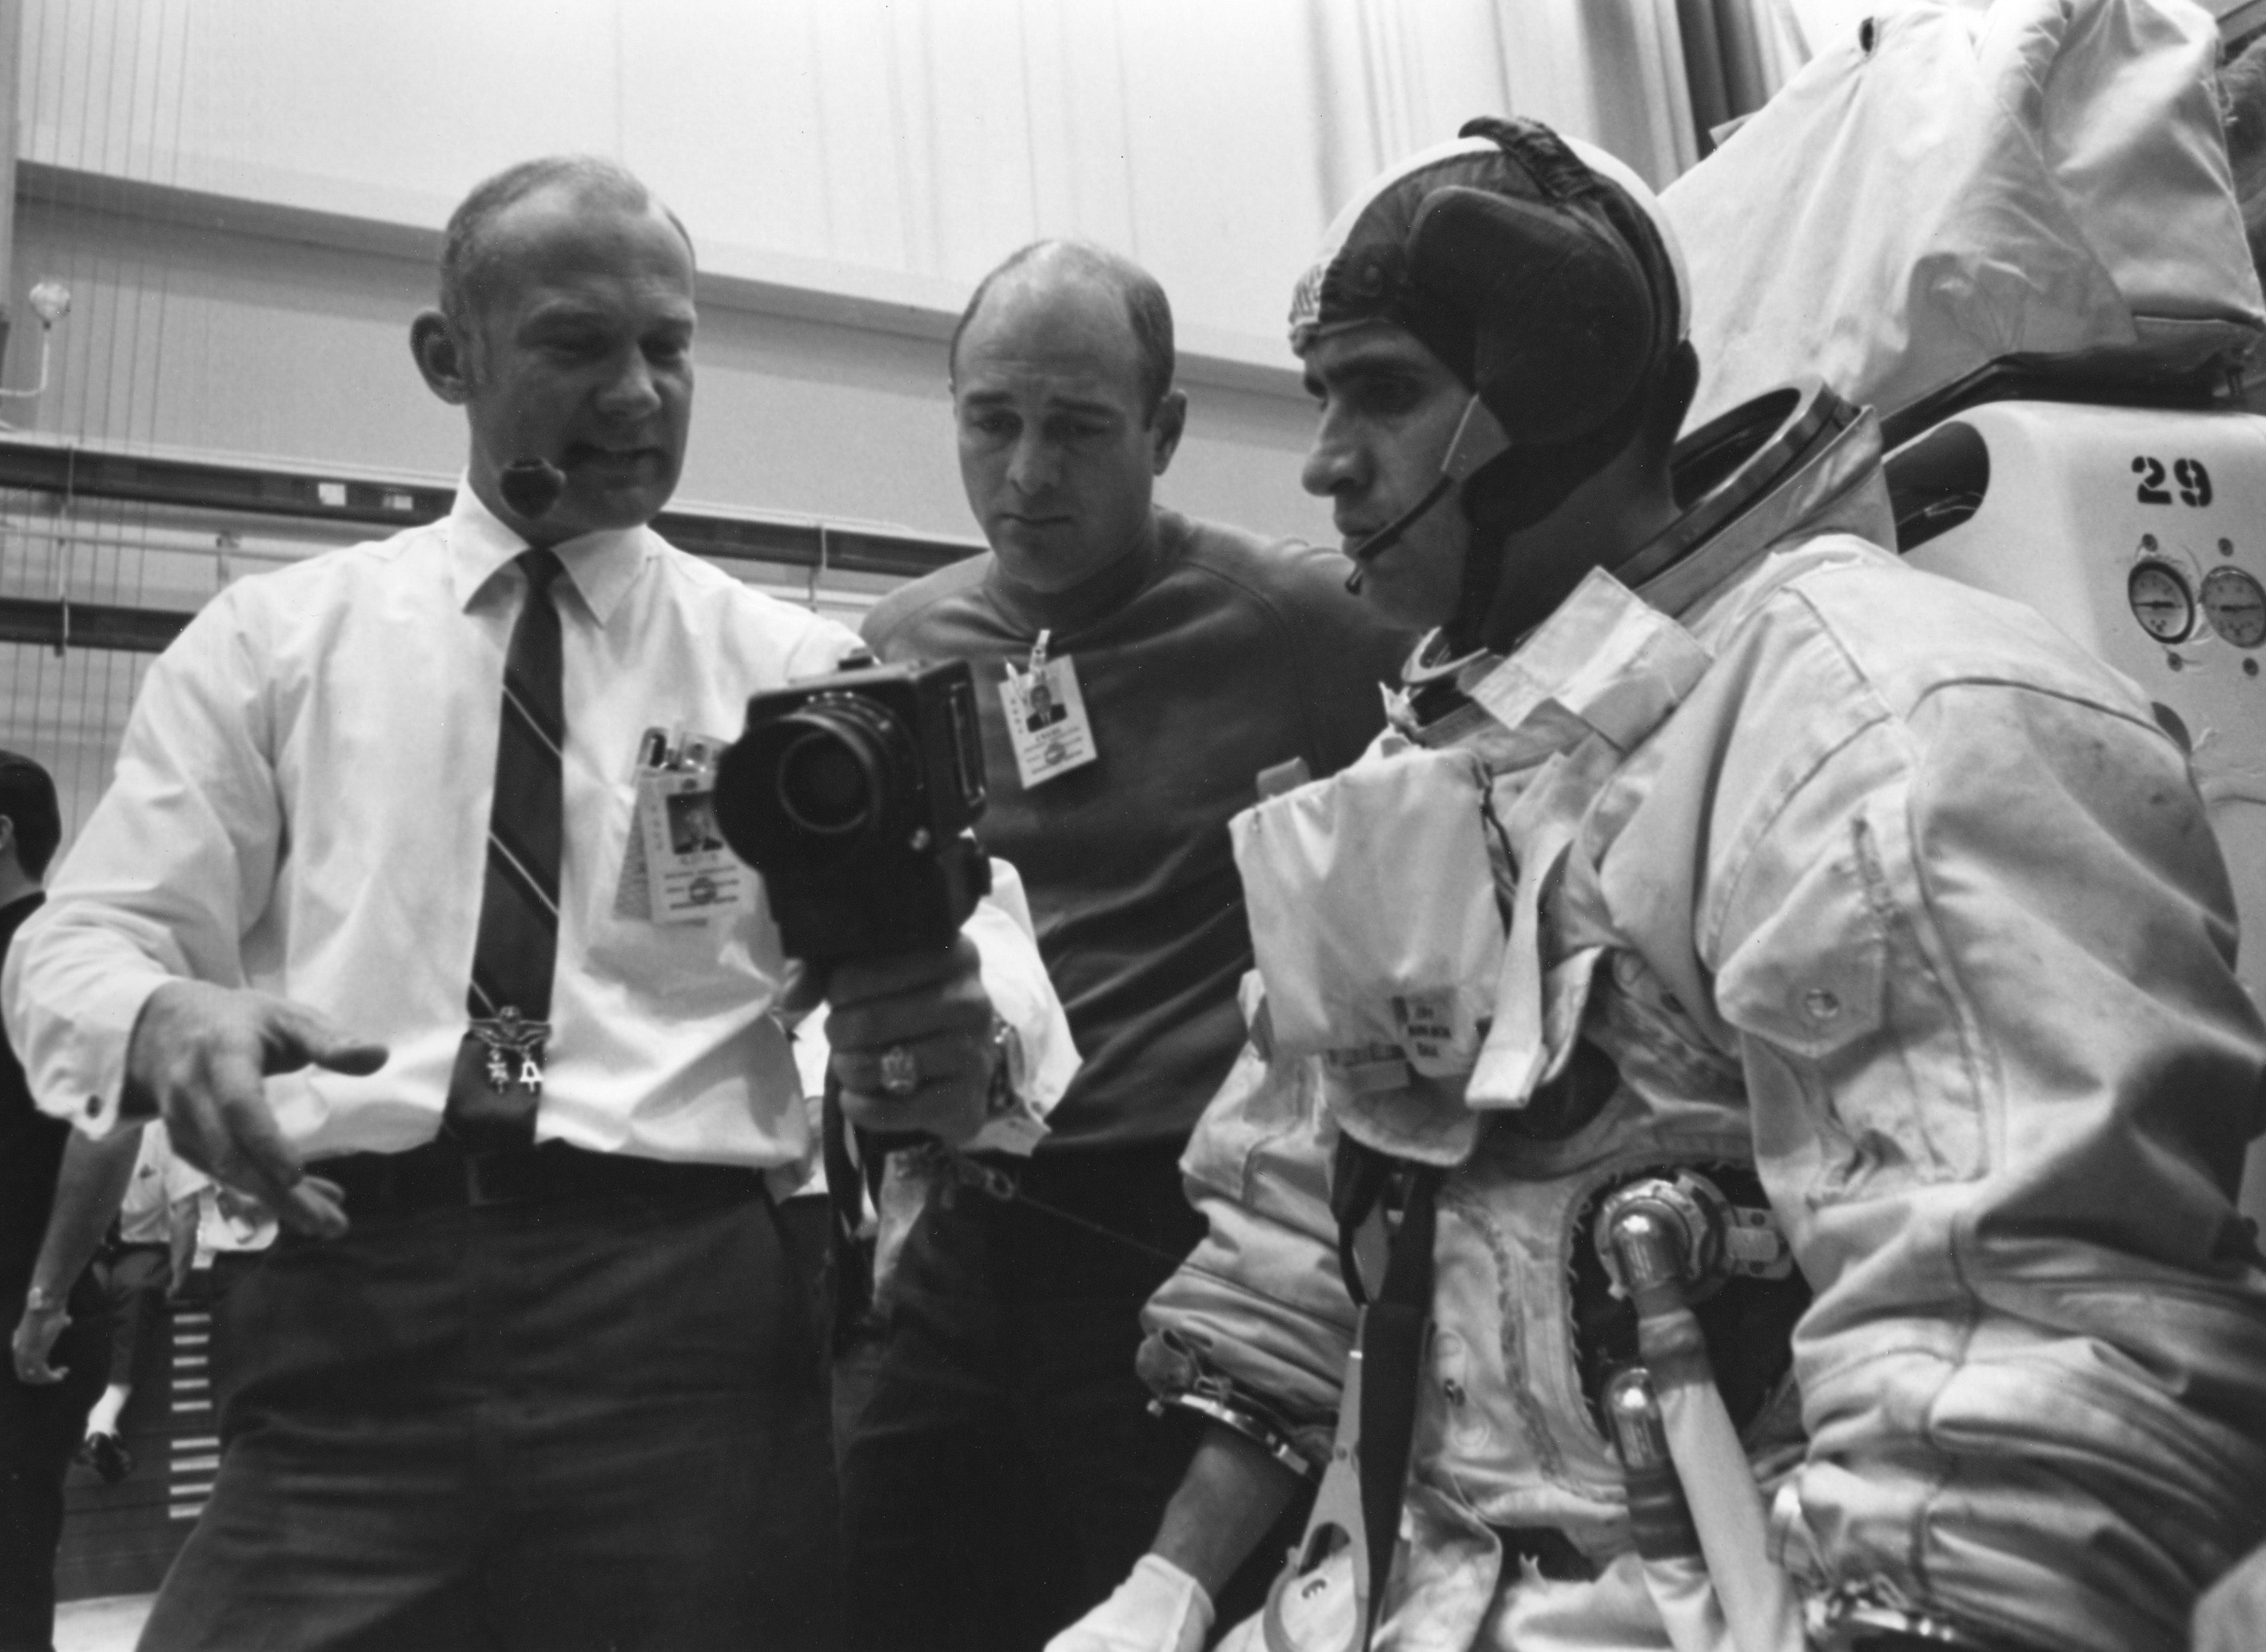 Apollo 11 astronaut Edwin E. “Buzz” Aldrin, left, confers with support astronauts Ronald E. Evans and Harrison H. “Jack” Schmitt, the only geologist in the astronaut corps at the time, during training for deployment of the Early Apollo Science Experiment Package (EASEP)